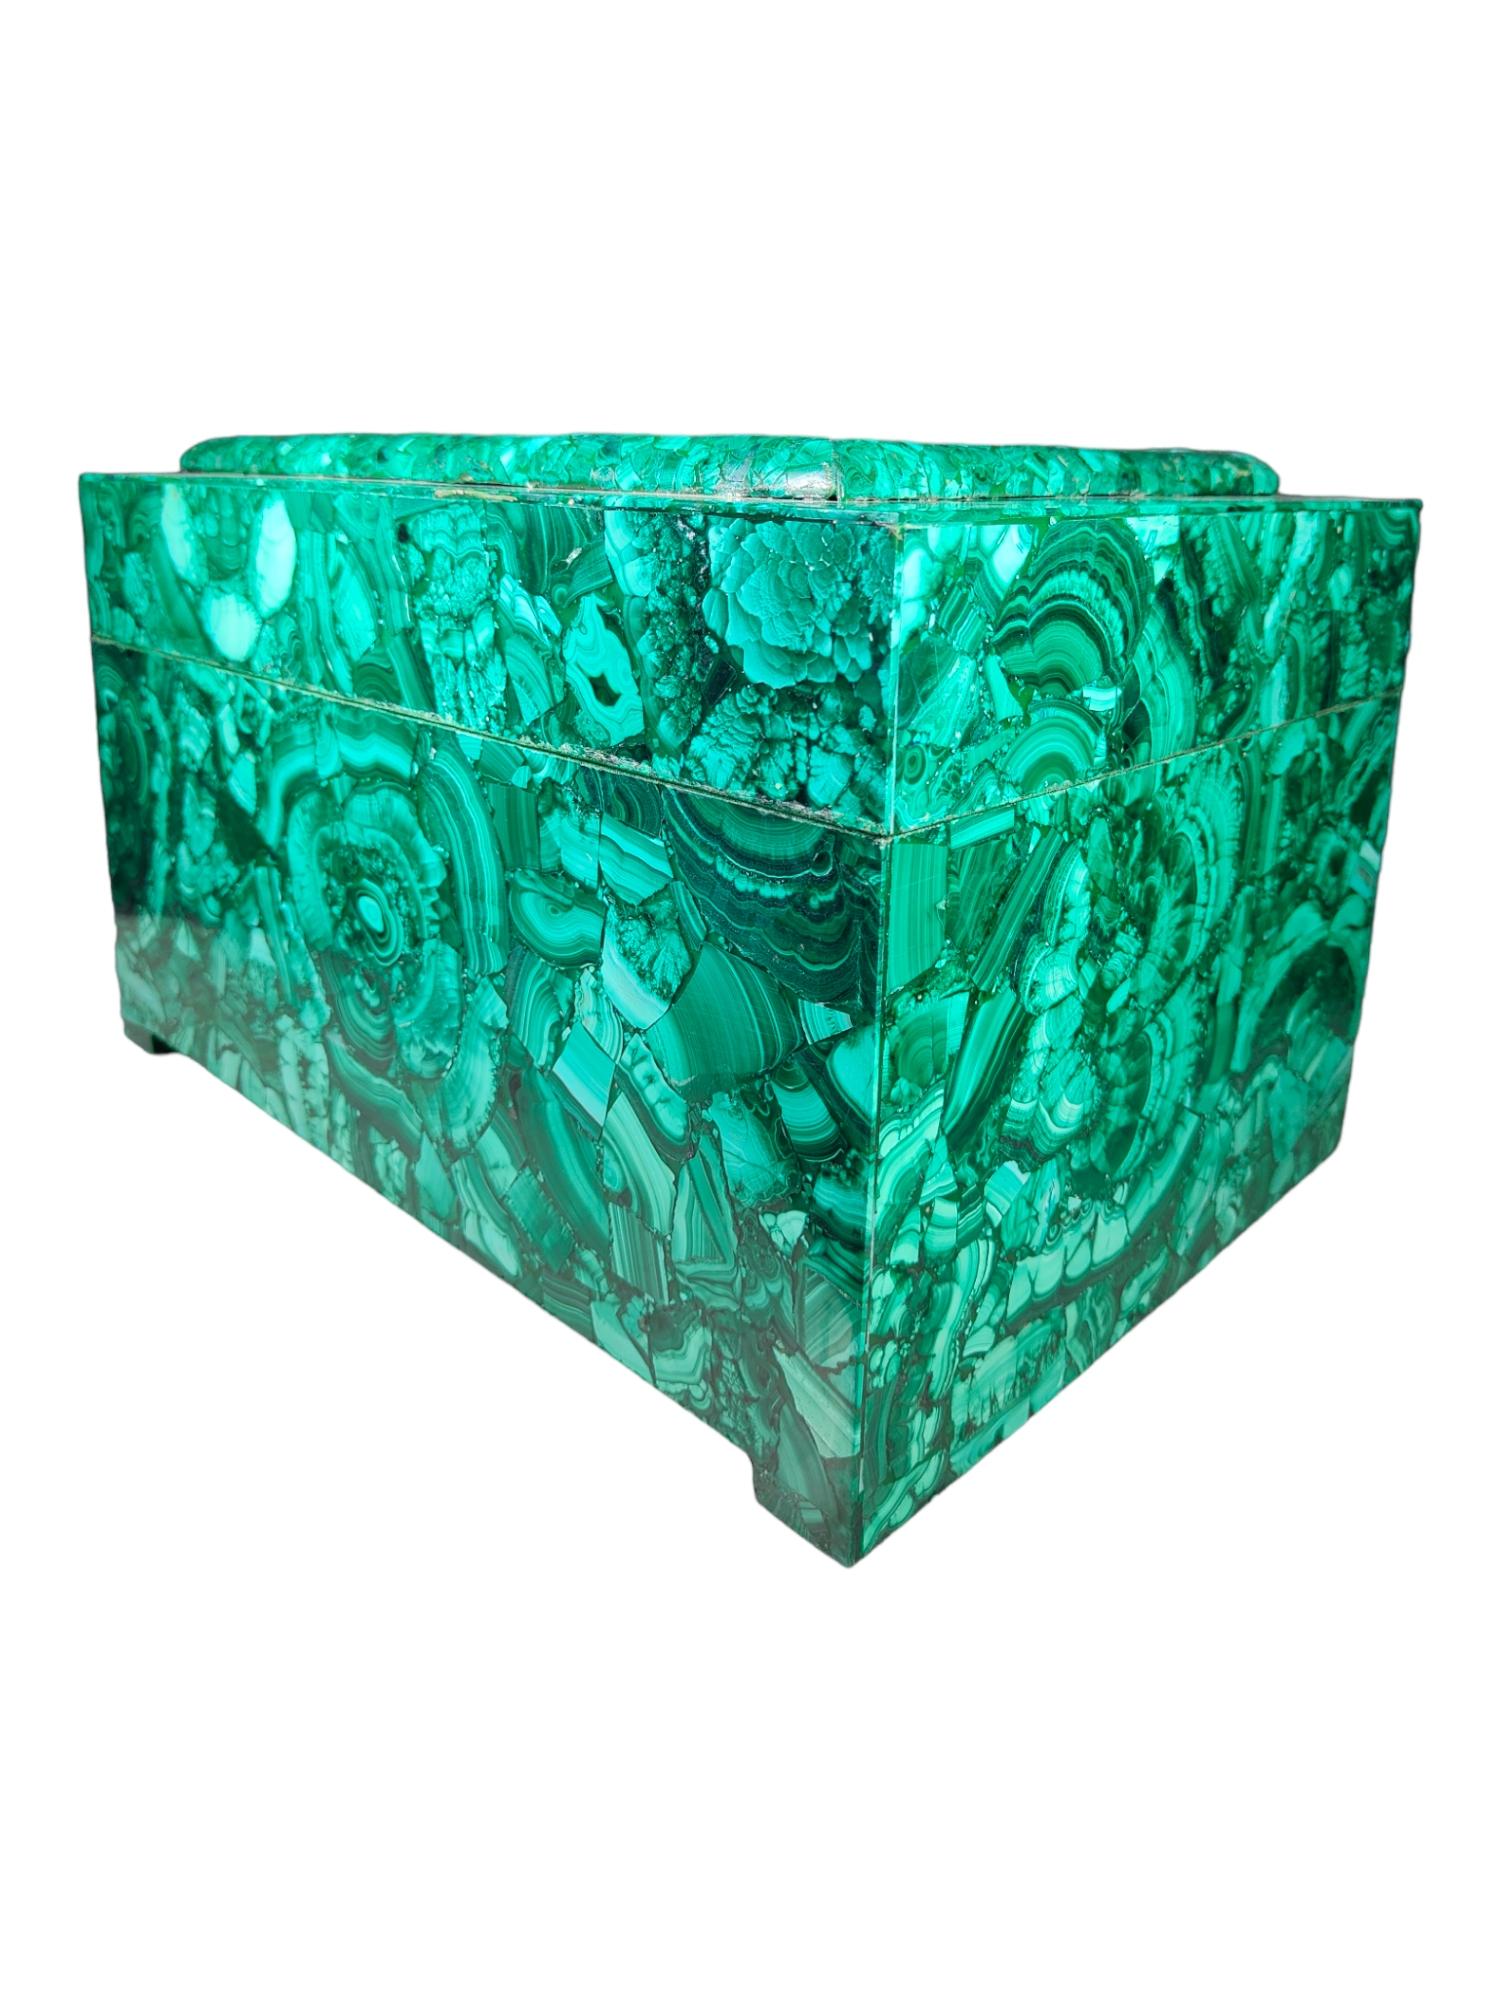 Large Malachite Box from the Mid-20th Century For Sale 8